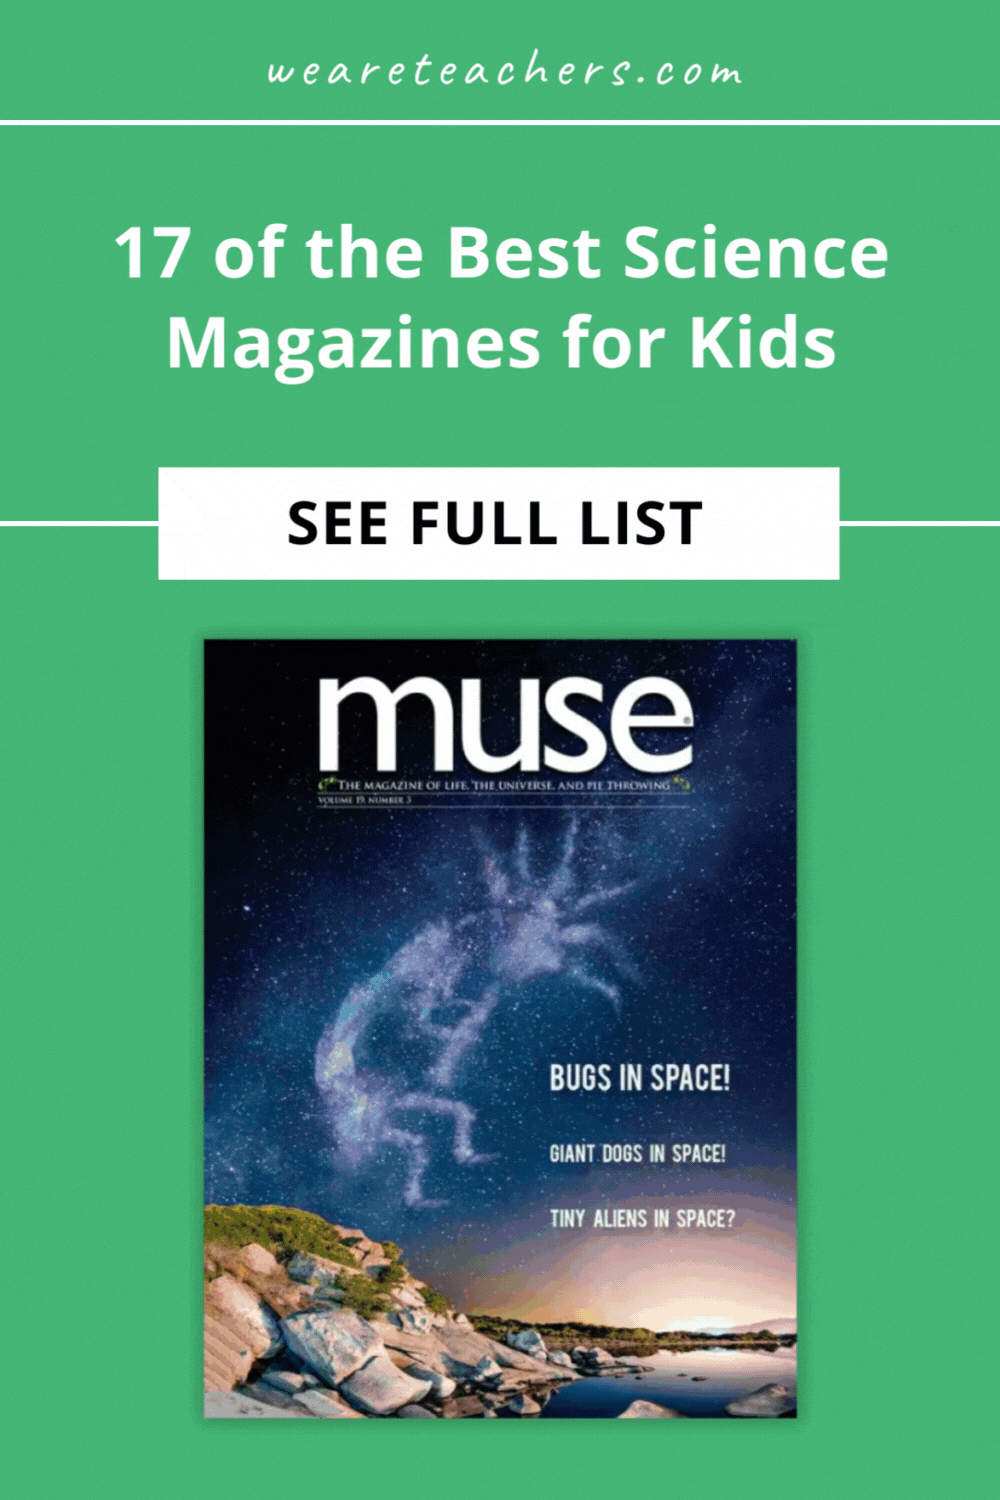 Want science news sent straight to your classroom? These are the best science magazines for kids to get students reading about science.